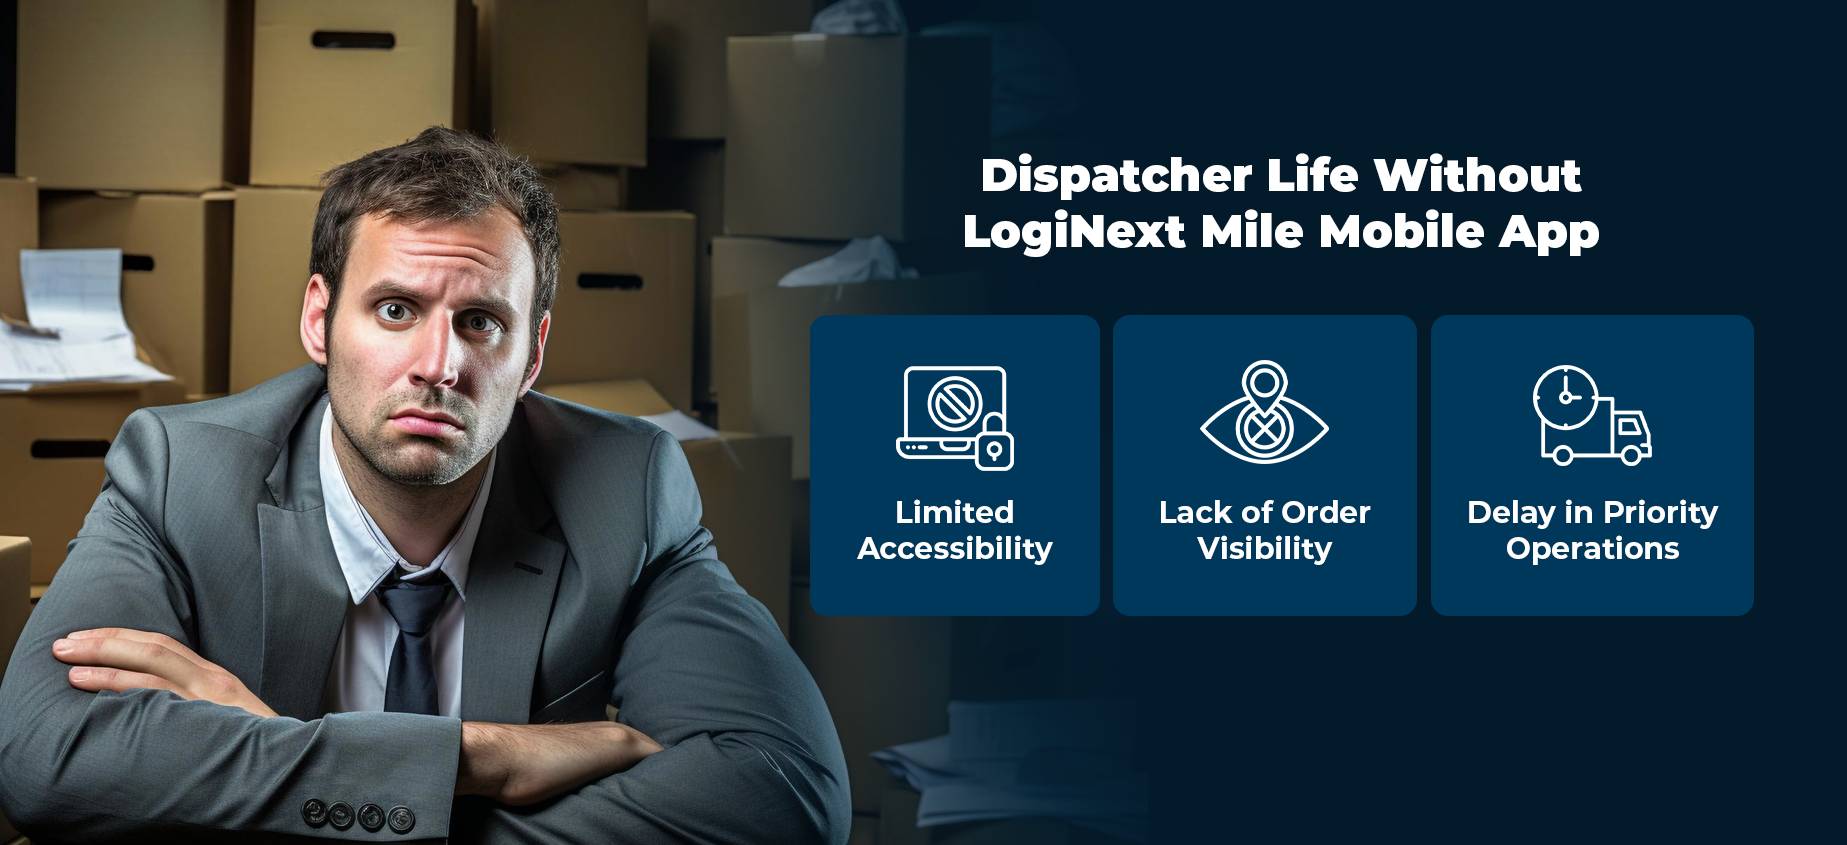 Application mobile Dispatcher Life Without Mile